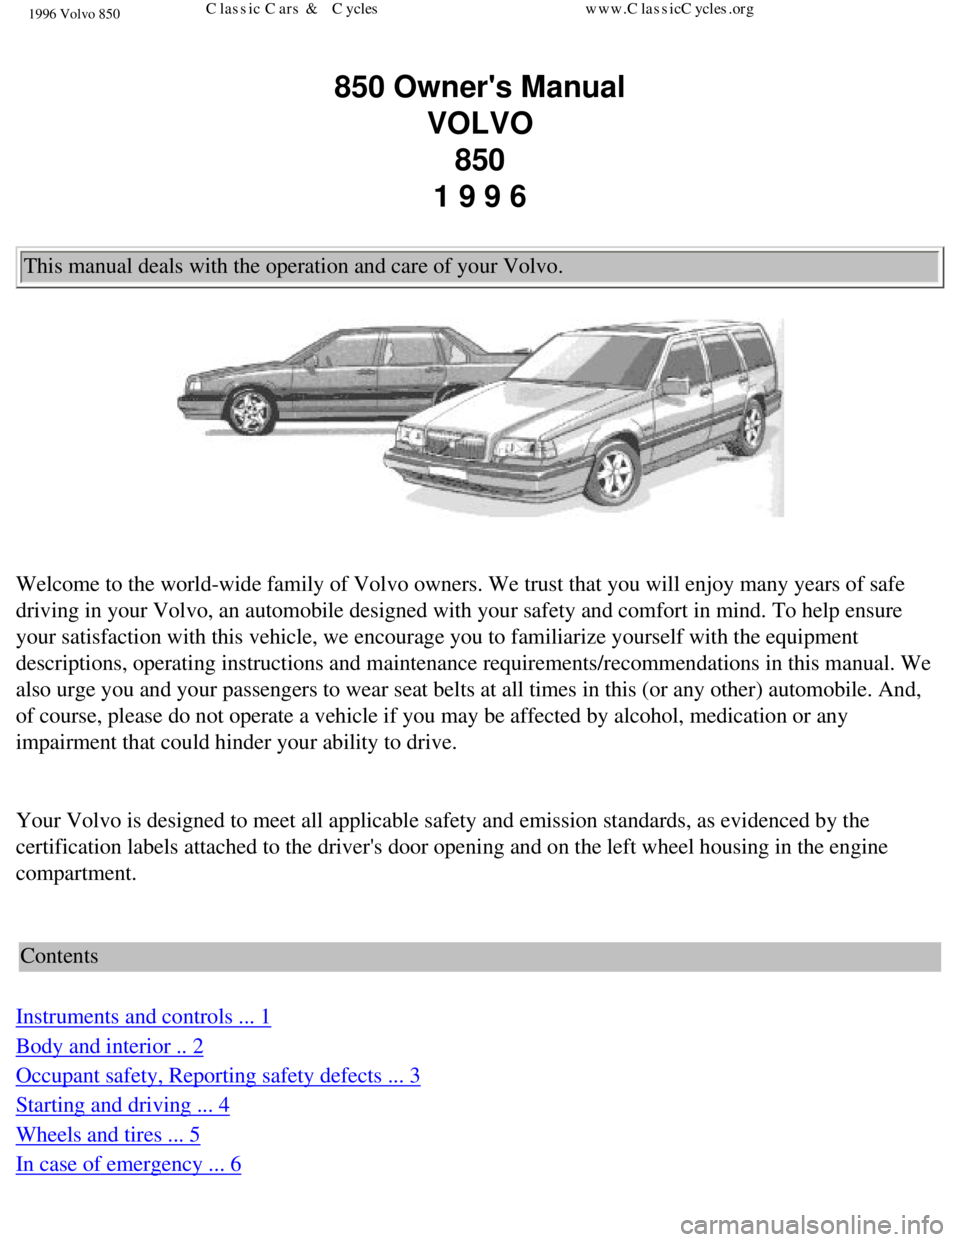 VOLVO 850 1996  Owners Manual 
1996 Volvo 850
850 Owners Manual  VOLVO  850  
1 9 9 6 
This manual deals with the operation and care of your Volvo. 
 
Welcome to the world-wide family of Volvo owners. We trust that you will\
 enj